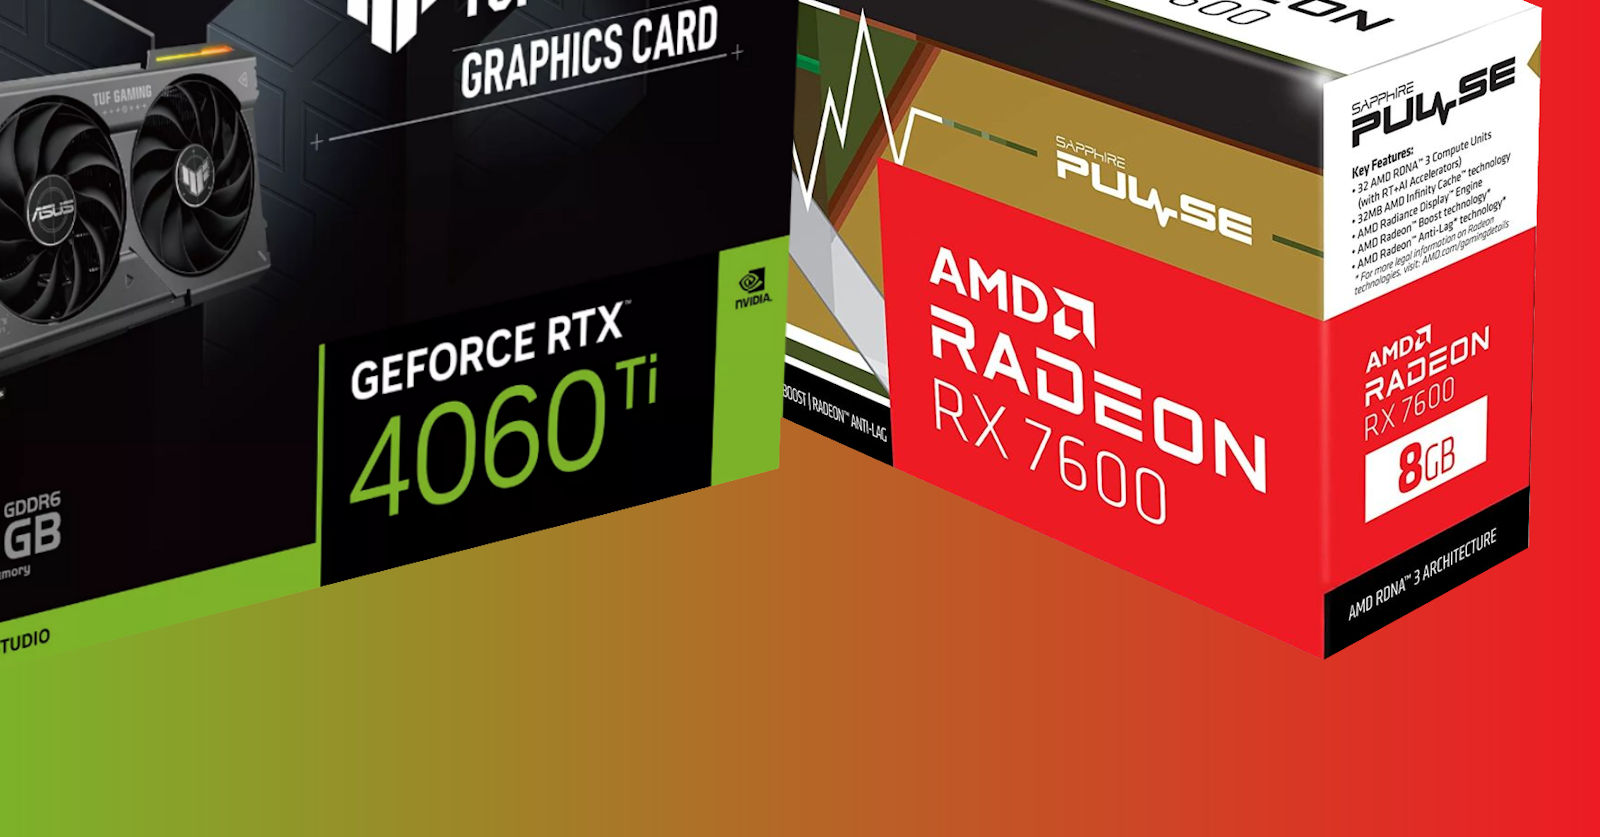 First leaked gaming and ray tracing benchmarks for AMD's RX 6700XT